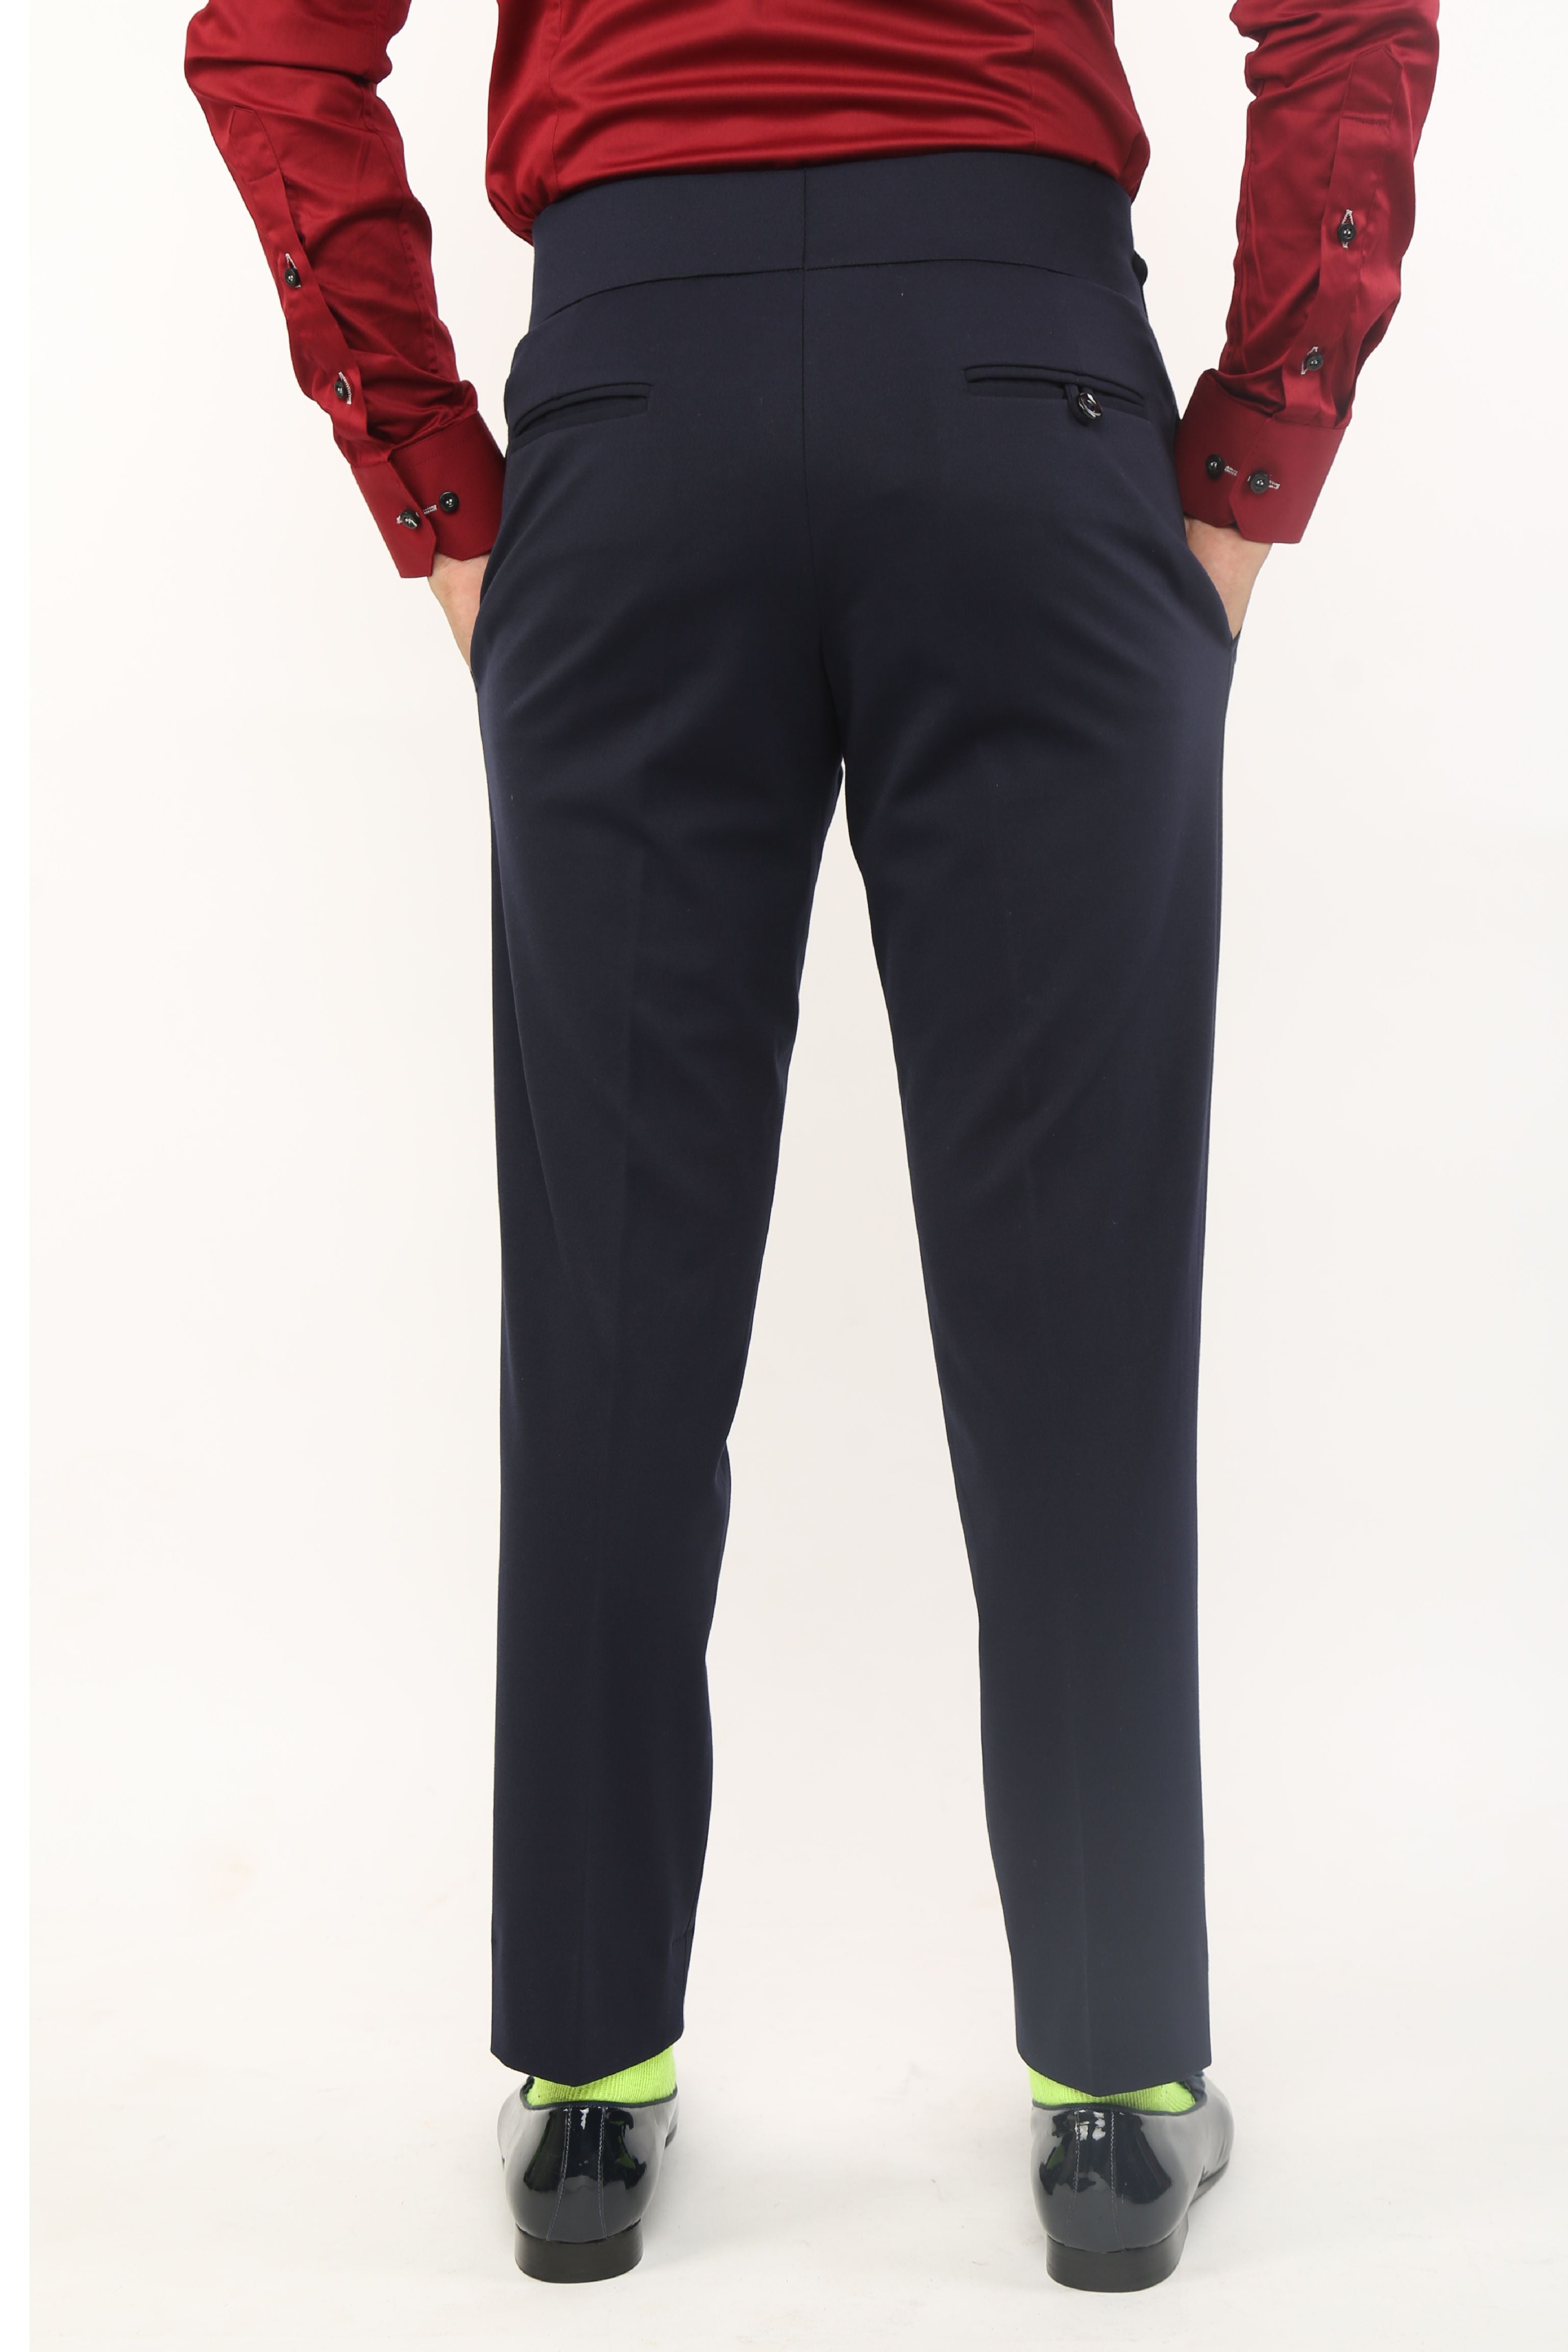 A Gentlemans Tale  The beltless pants as we know of it now dates back  to 1967 it was known then as the sansabelt slacks named after the brand  Sansabelt The word 